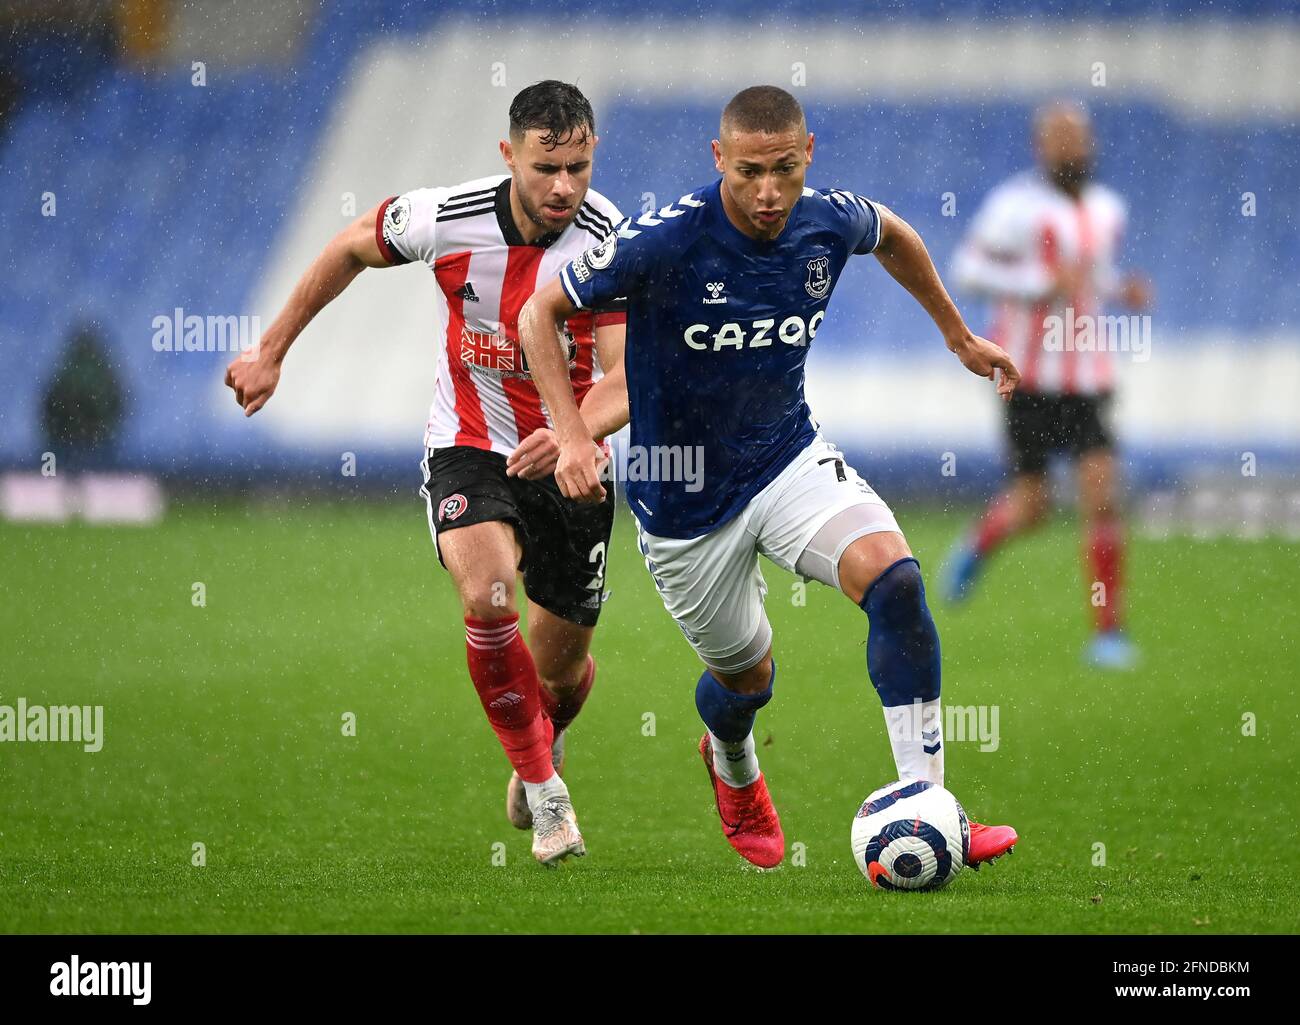 Sheffield United's George Baldock (left) and Everton's Richarlison battle for the ball during the Premier League match at Goodison Park, Liverpool. Picture date: Sunday May 16, 2021. Stock Photo